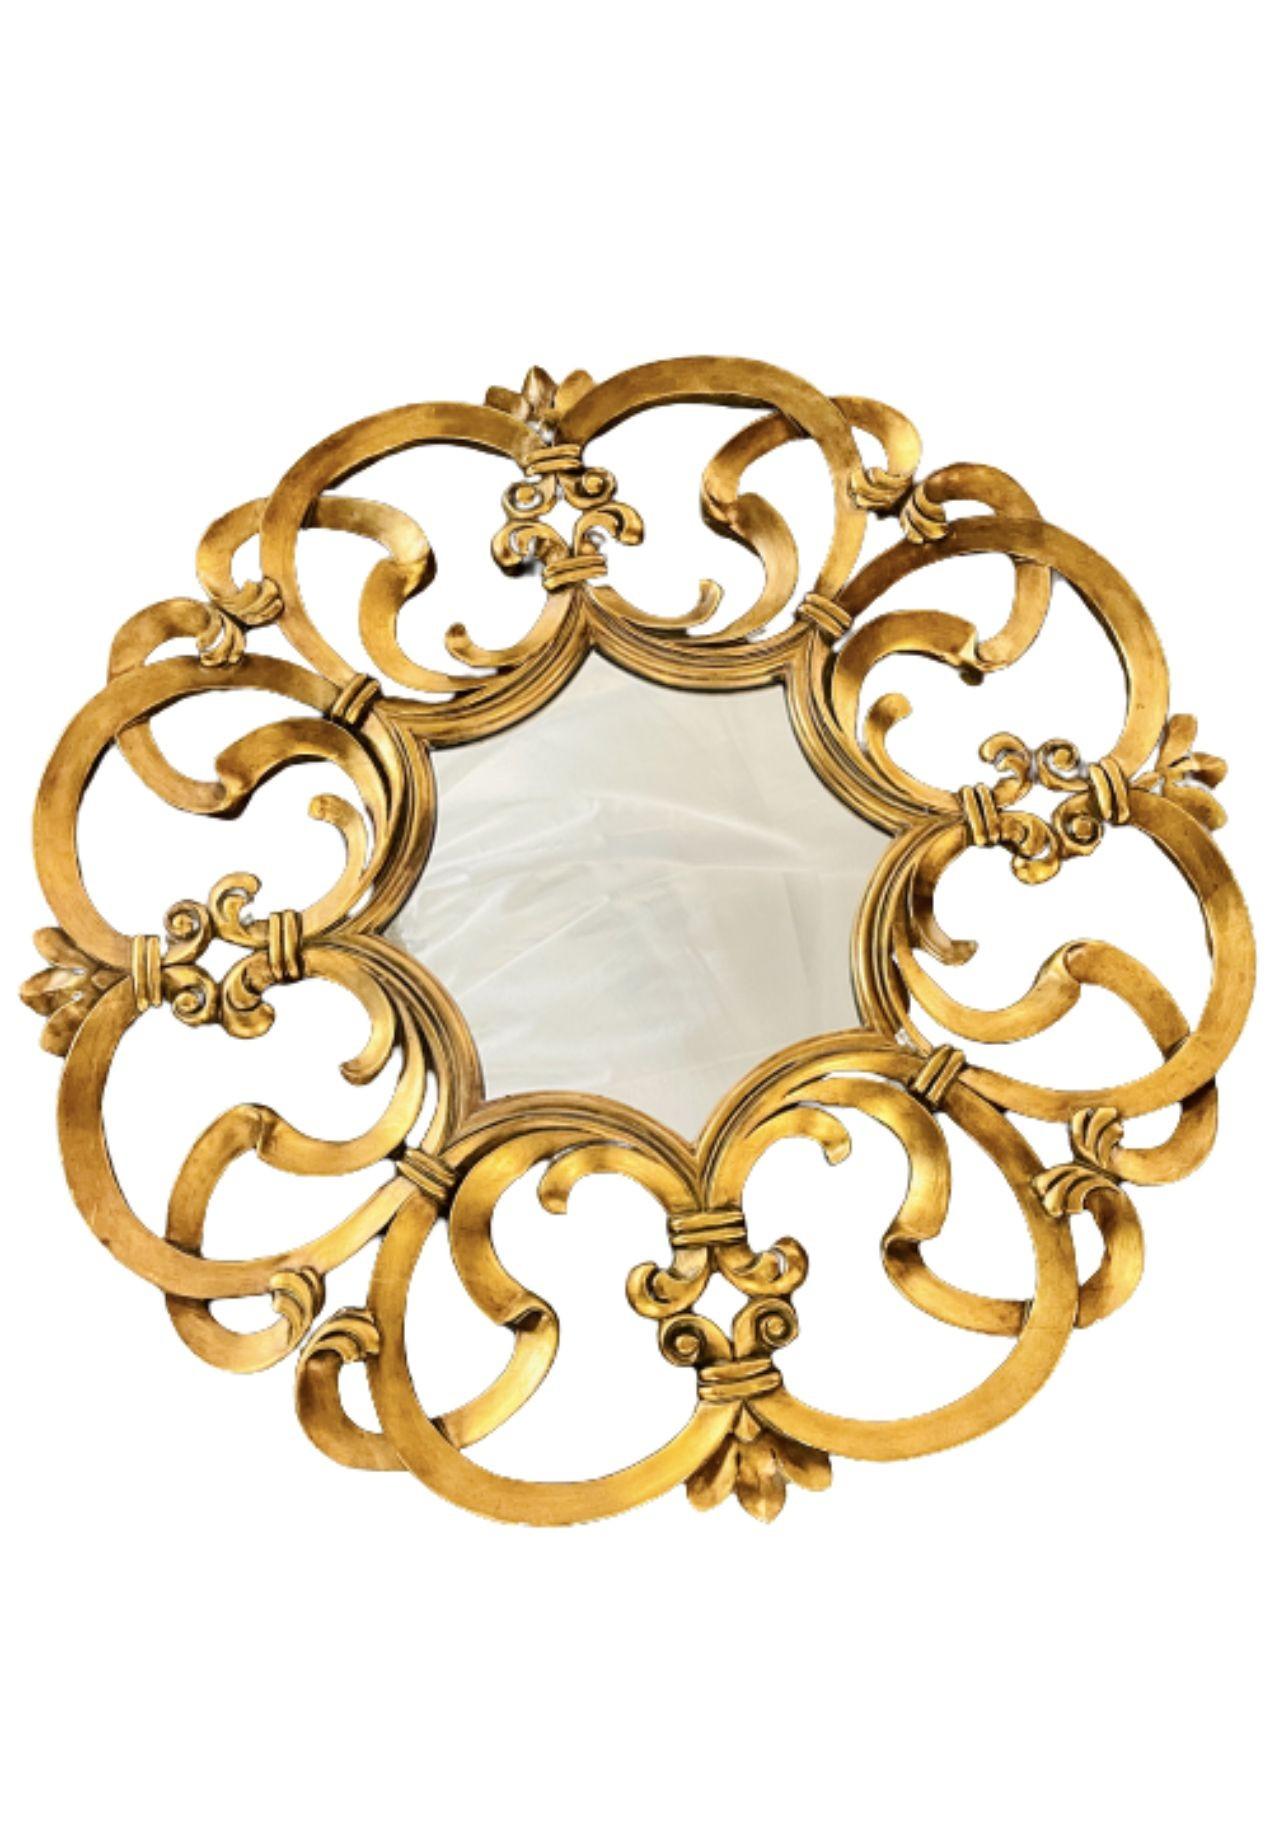 Circular wall, console or Pier mirror, Italian, gilt wood.
 
 
The whole having a pierced gilt gold fame of circluar design with a center mirror. The frame carved in the form of a kings crest.